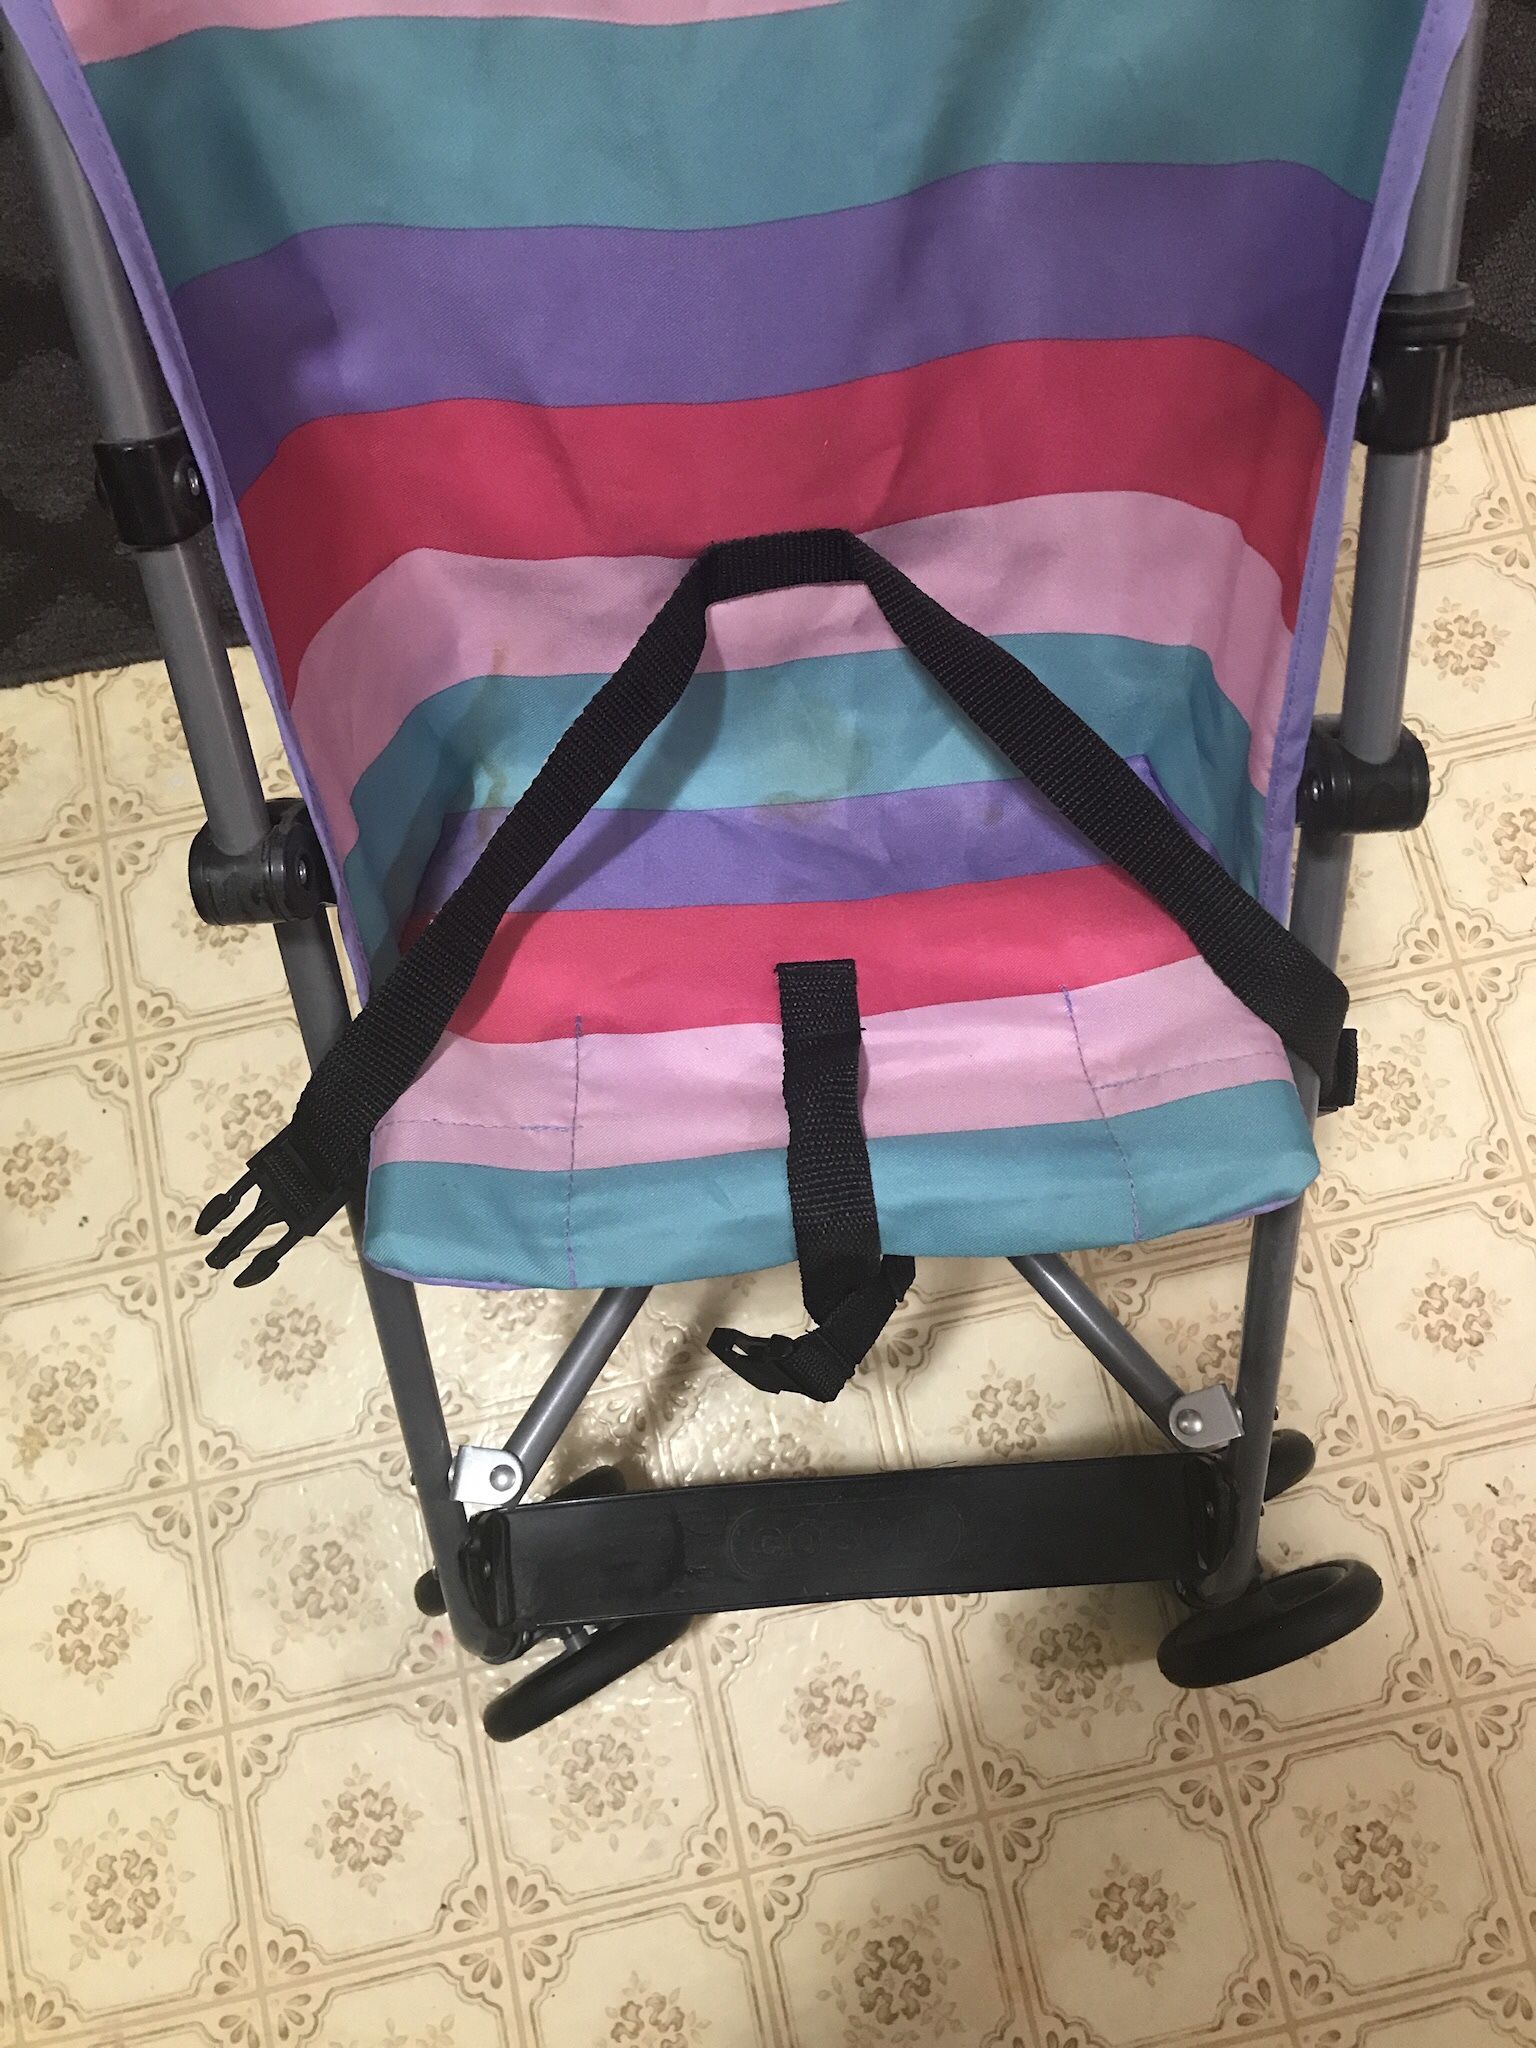 = multicolored, collapsible baby /toddler stroller for sale.